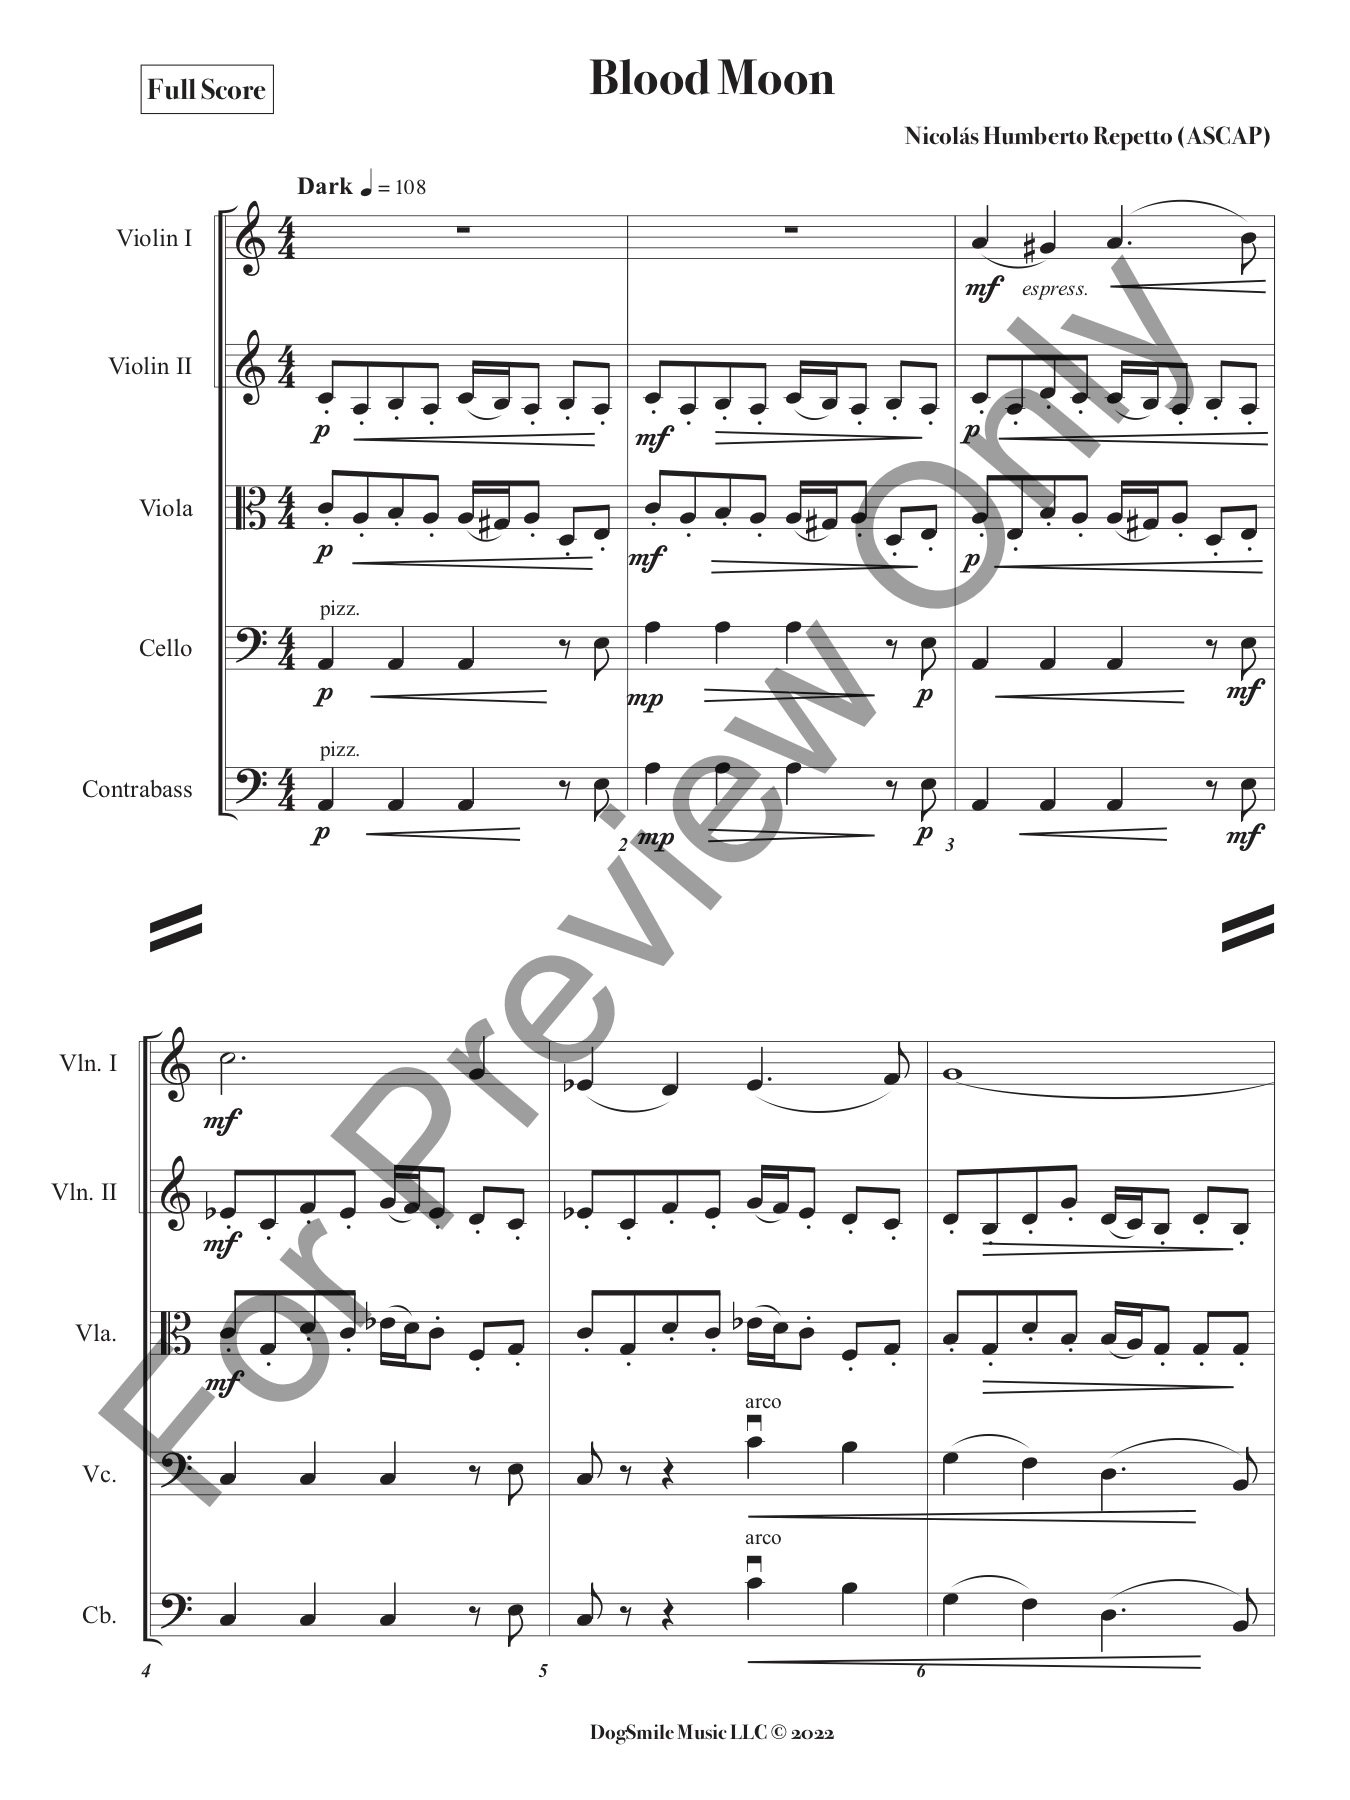 Blood Moon for String Orchestra - Cover Page and Full Score Only (for Preview Only p3).jpg